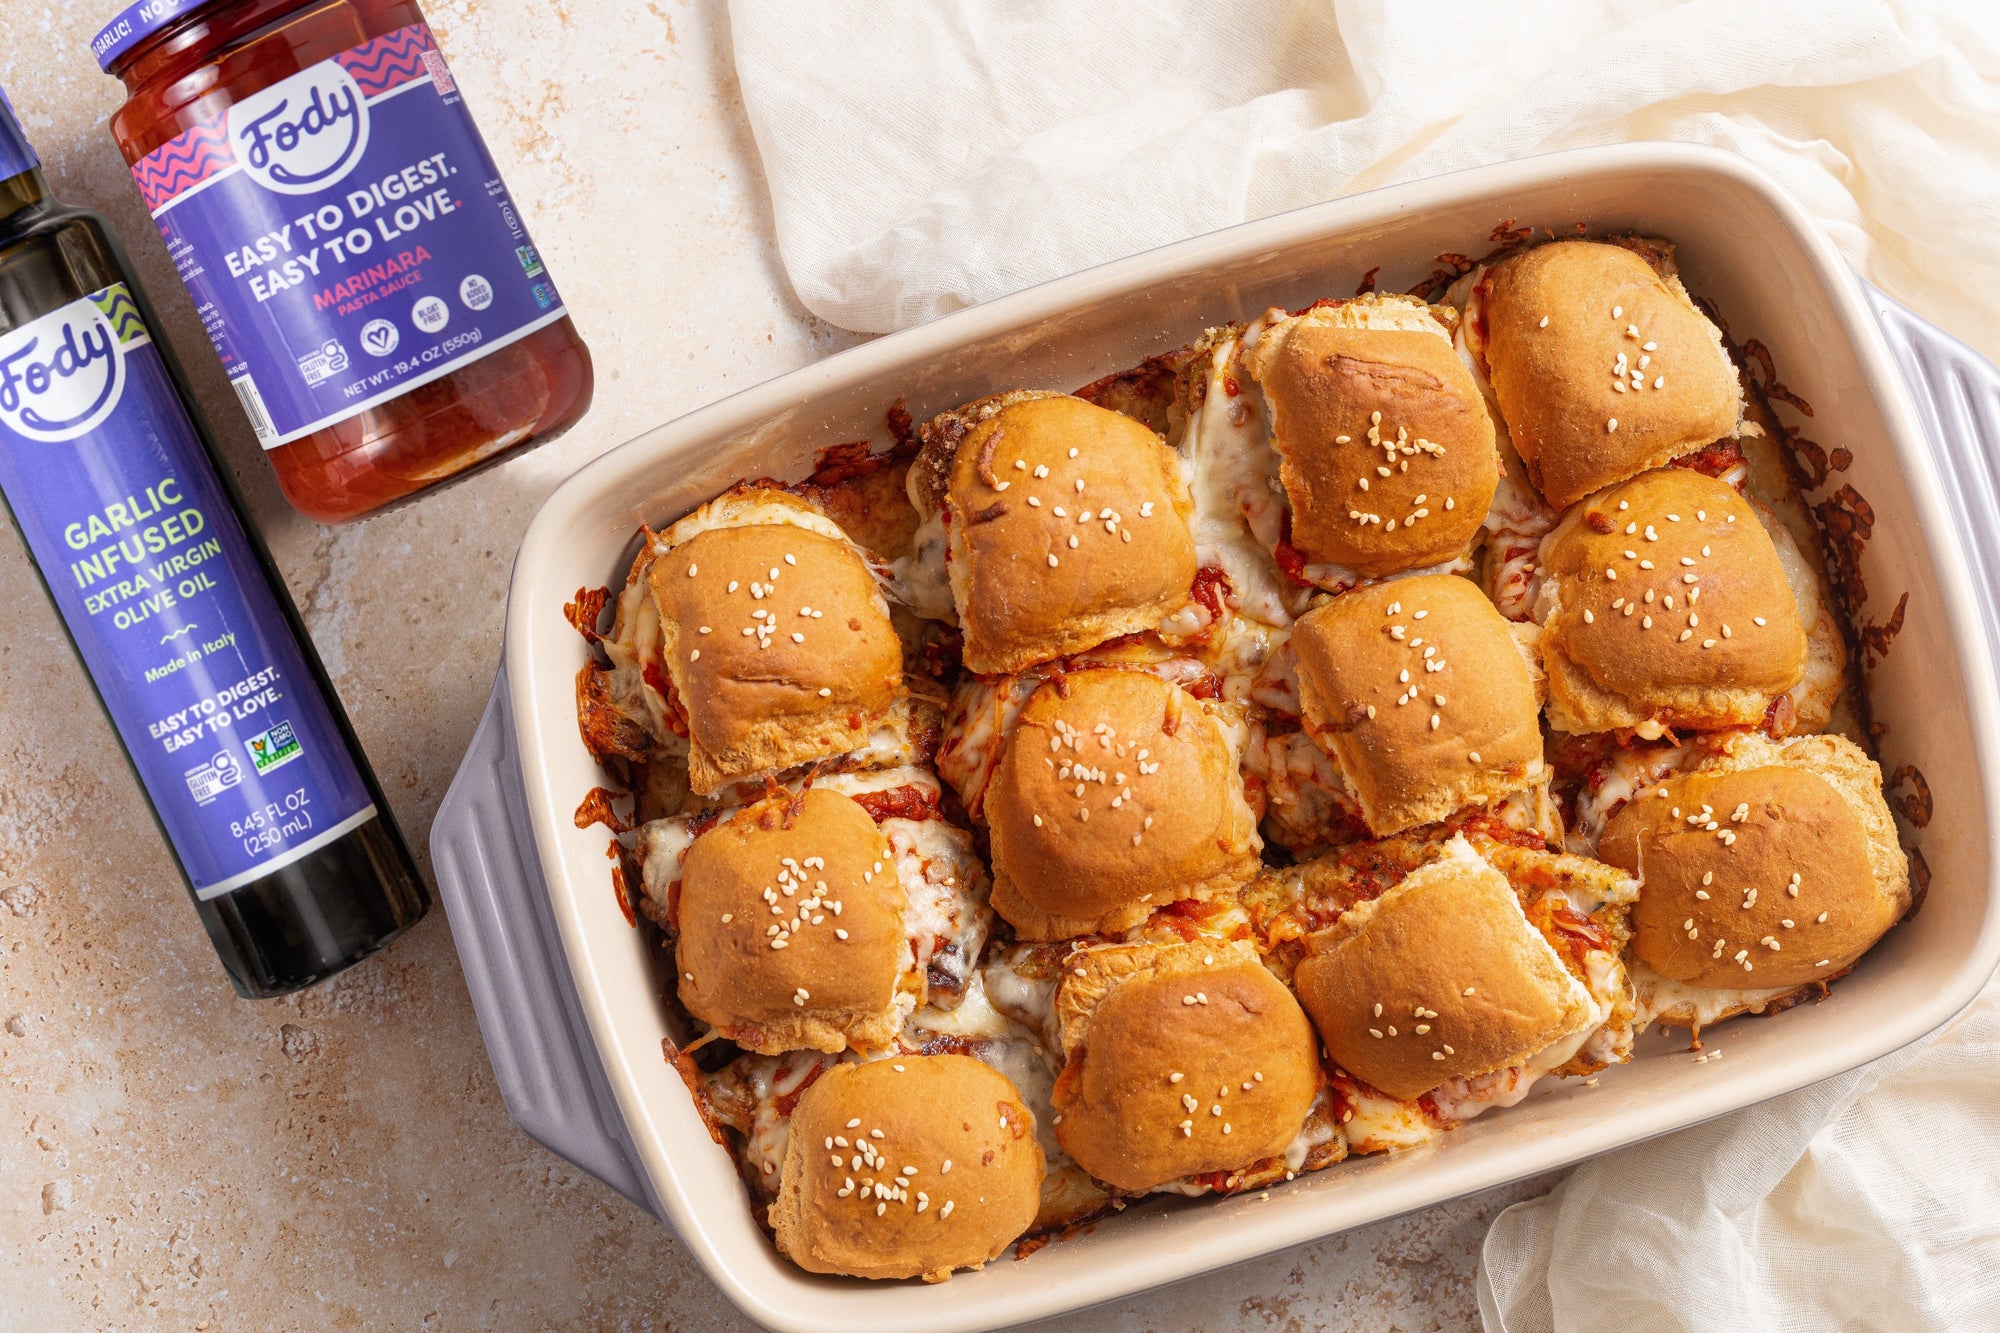 An image of Fody's chicken parm slider bake: a white baking pan of little chicken parm sliders beside a jar of low FODMAP marinara sauce and a bottle of low FODMAP olive oil.